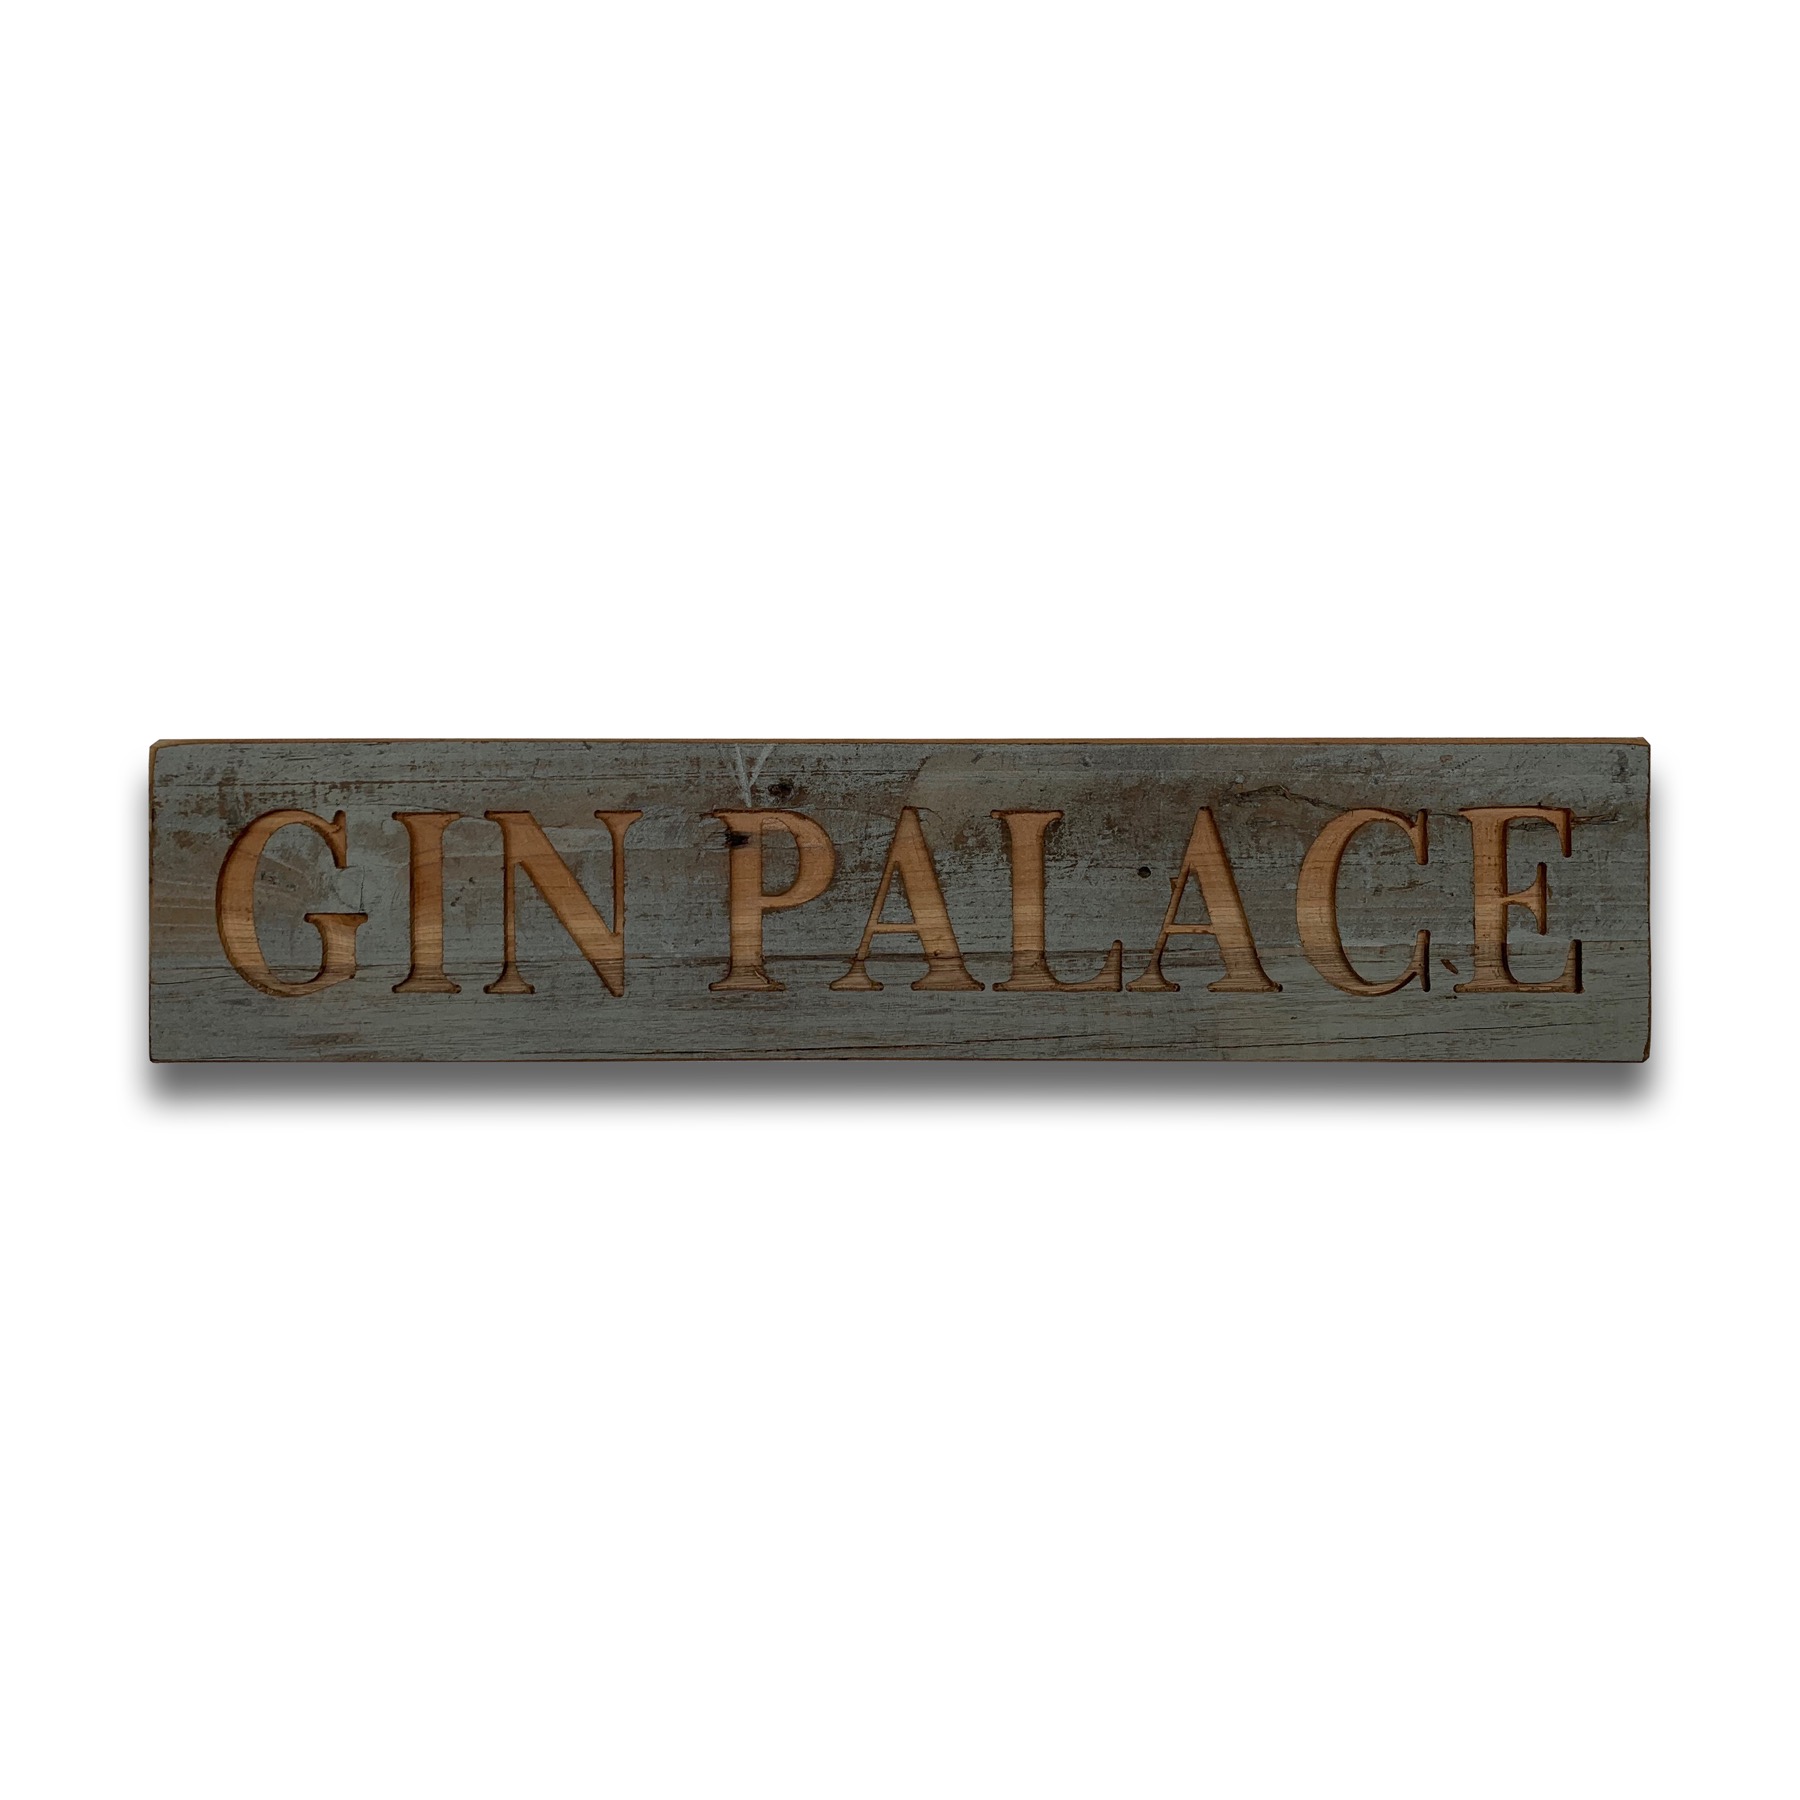 Gin Palace Grey Wash Wooden Message Plaque - Image 1